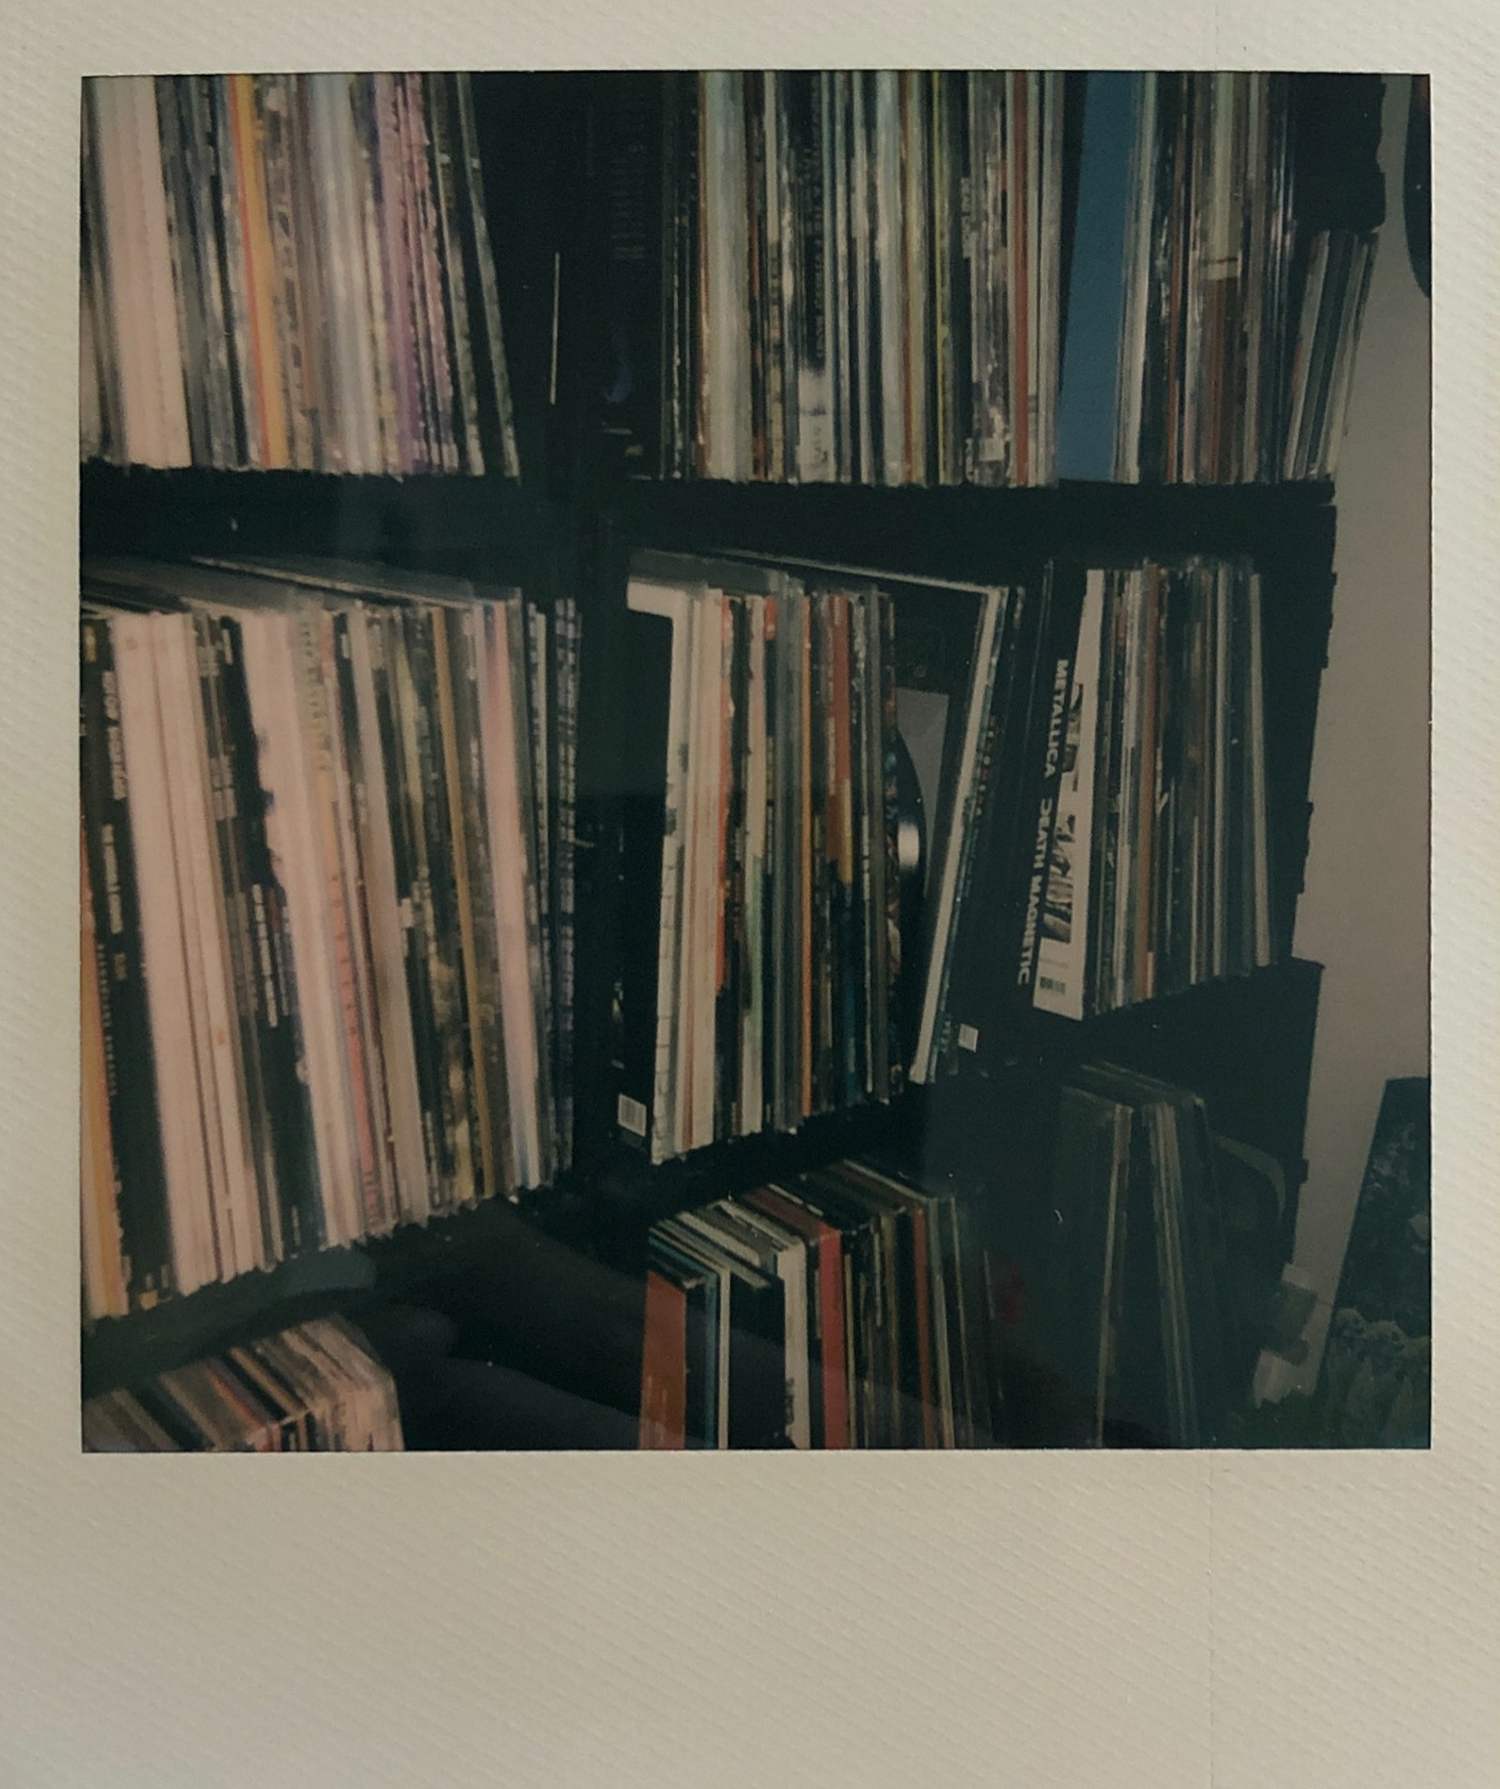 A Polaroid photo of my record collection in the 9 travel cases I store them